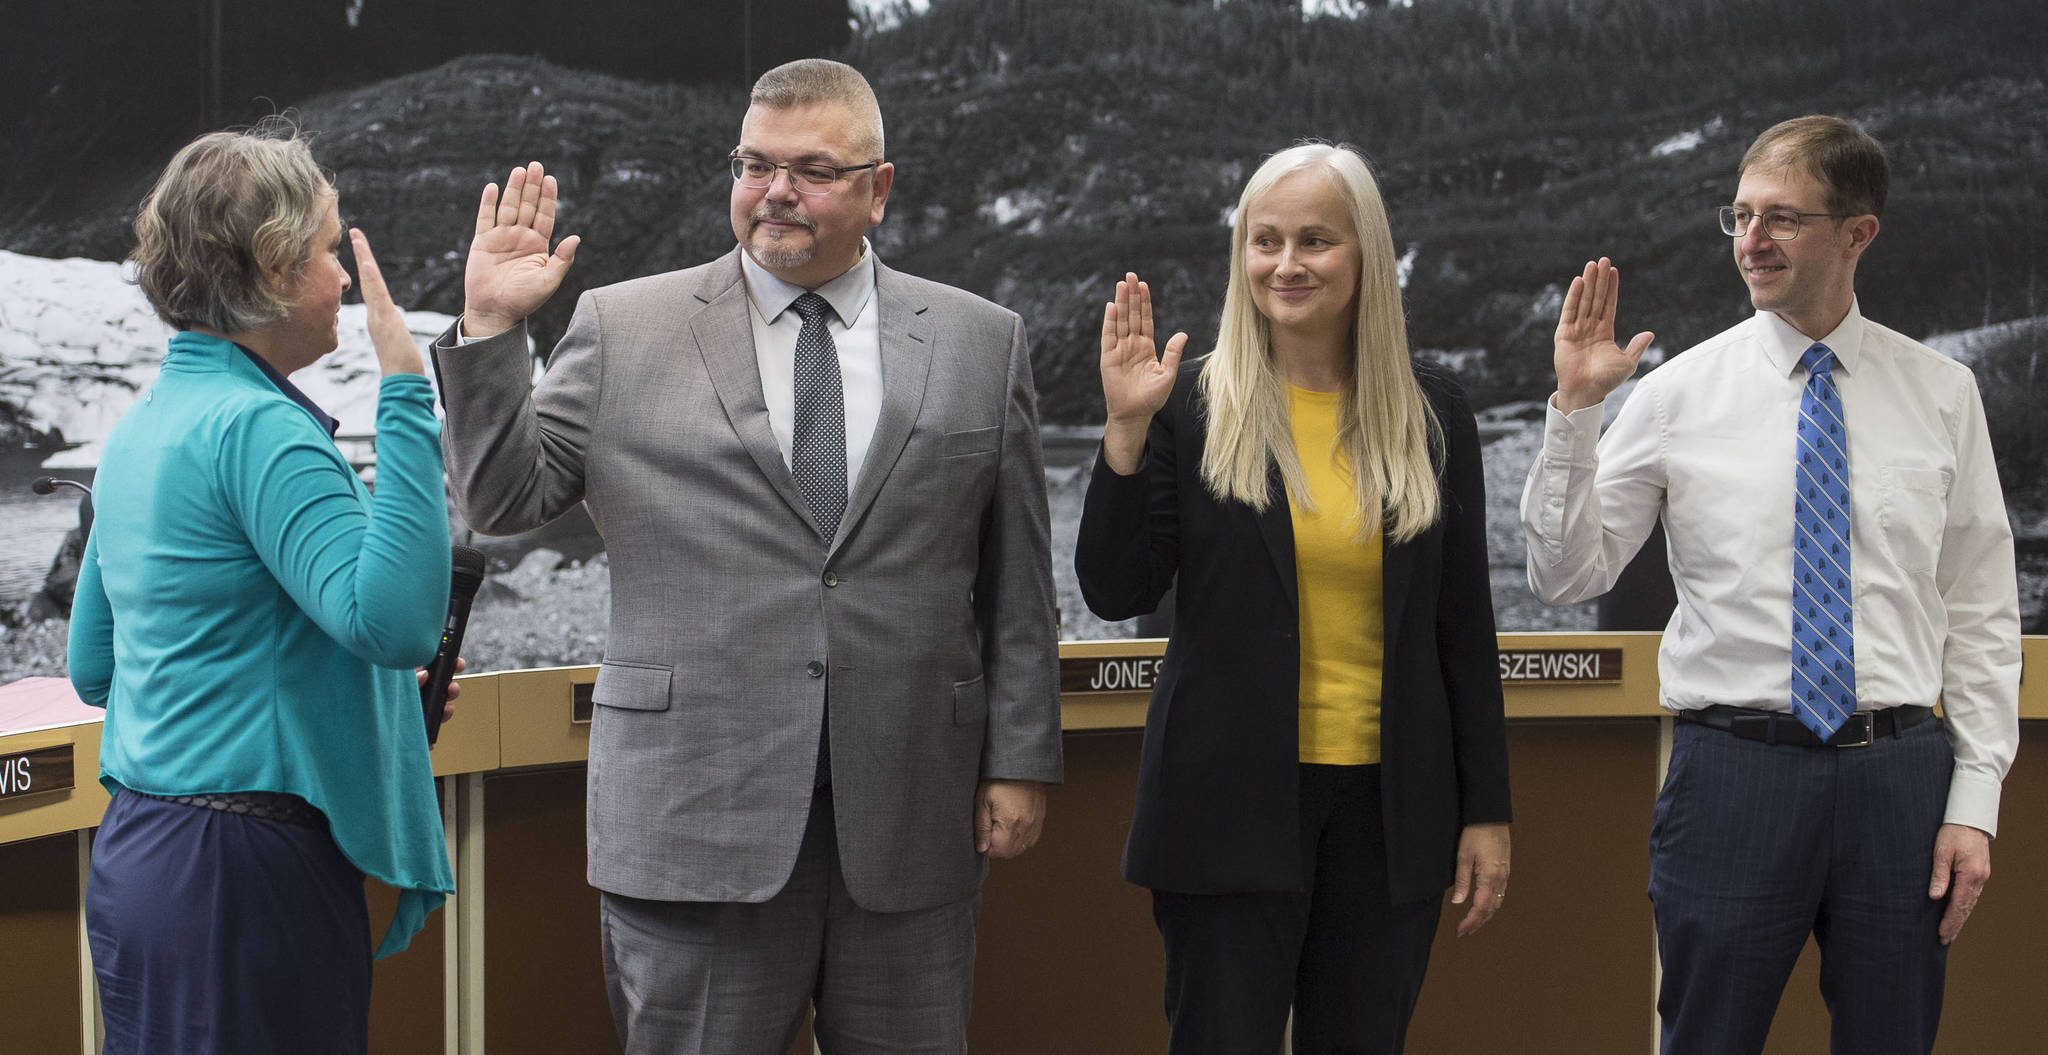 Municipal Attorney Amy Mead, left, swears-in new member Rob Edwardson and returning members Maria Gladziszewski and Jess Kiehl, right, at the Juneau Assembly meeting on Monday, Oct. 16, 2017. At the Monday, Nov. 6 Assembly meeting, Edwardson asked the Assembly to direct Mead to write up an ordinance that would restore the full senior sales tax exemption. The motion failed, but Assembly members said they would talk about the issue later on. (Michael Penn | Juneau Empire)